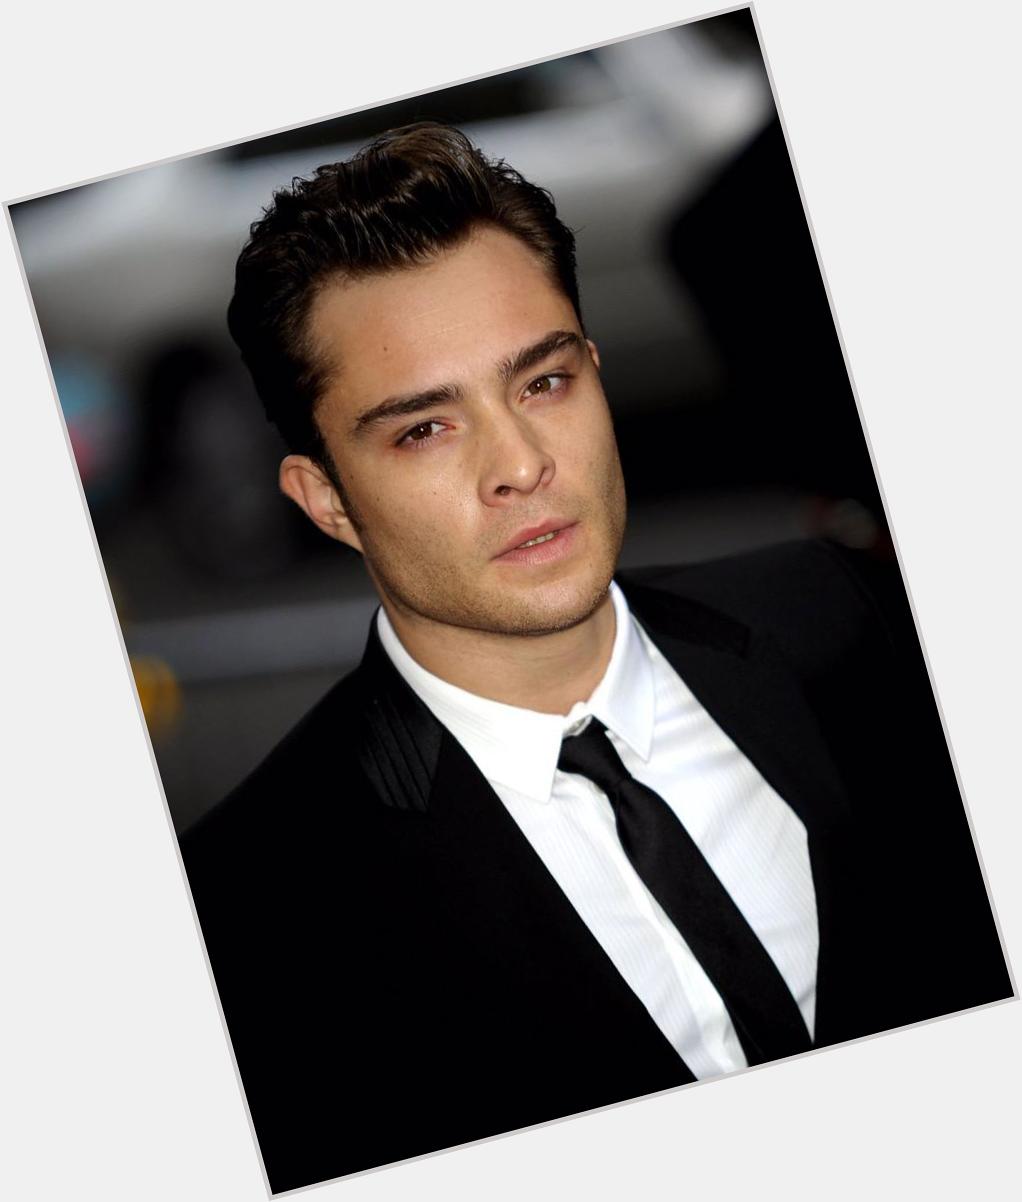 HAPPY BDAY ED WESTWICK YOU GORGEOUS HUMAN BEING 